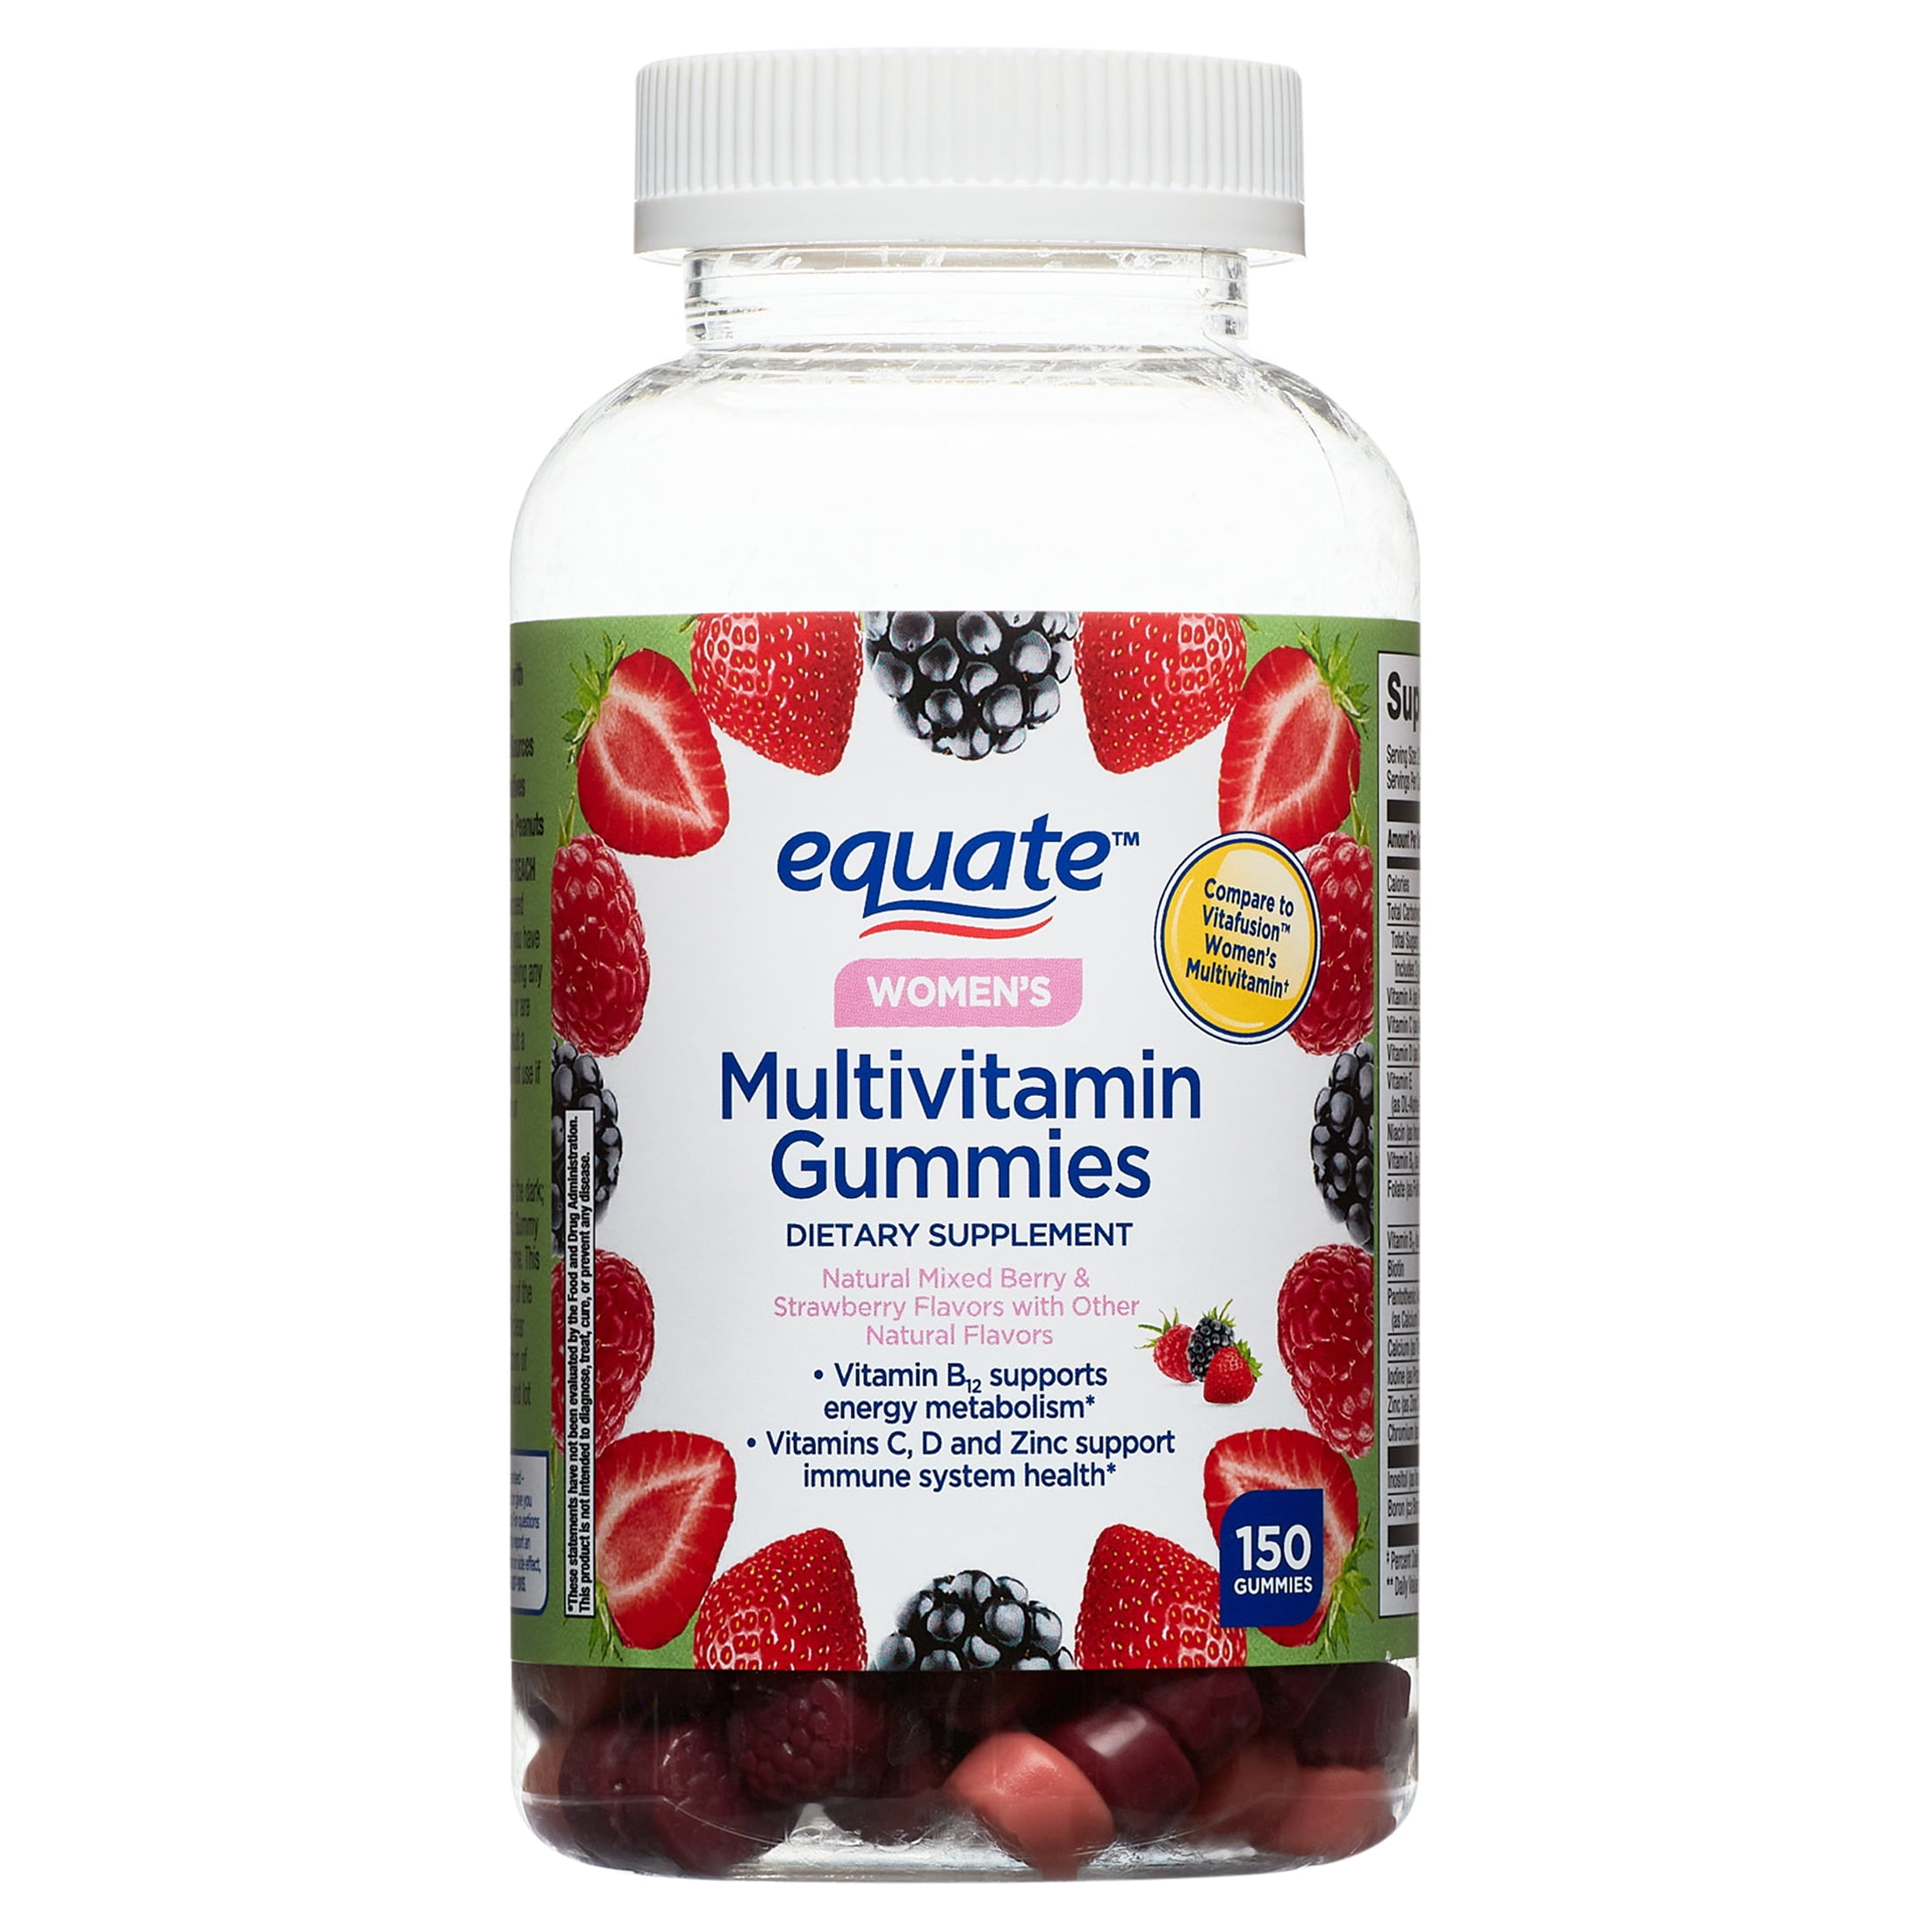 Equate Women's Multivitamin Gummies for General Health, Mixed